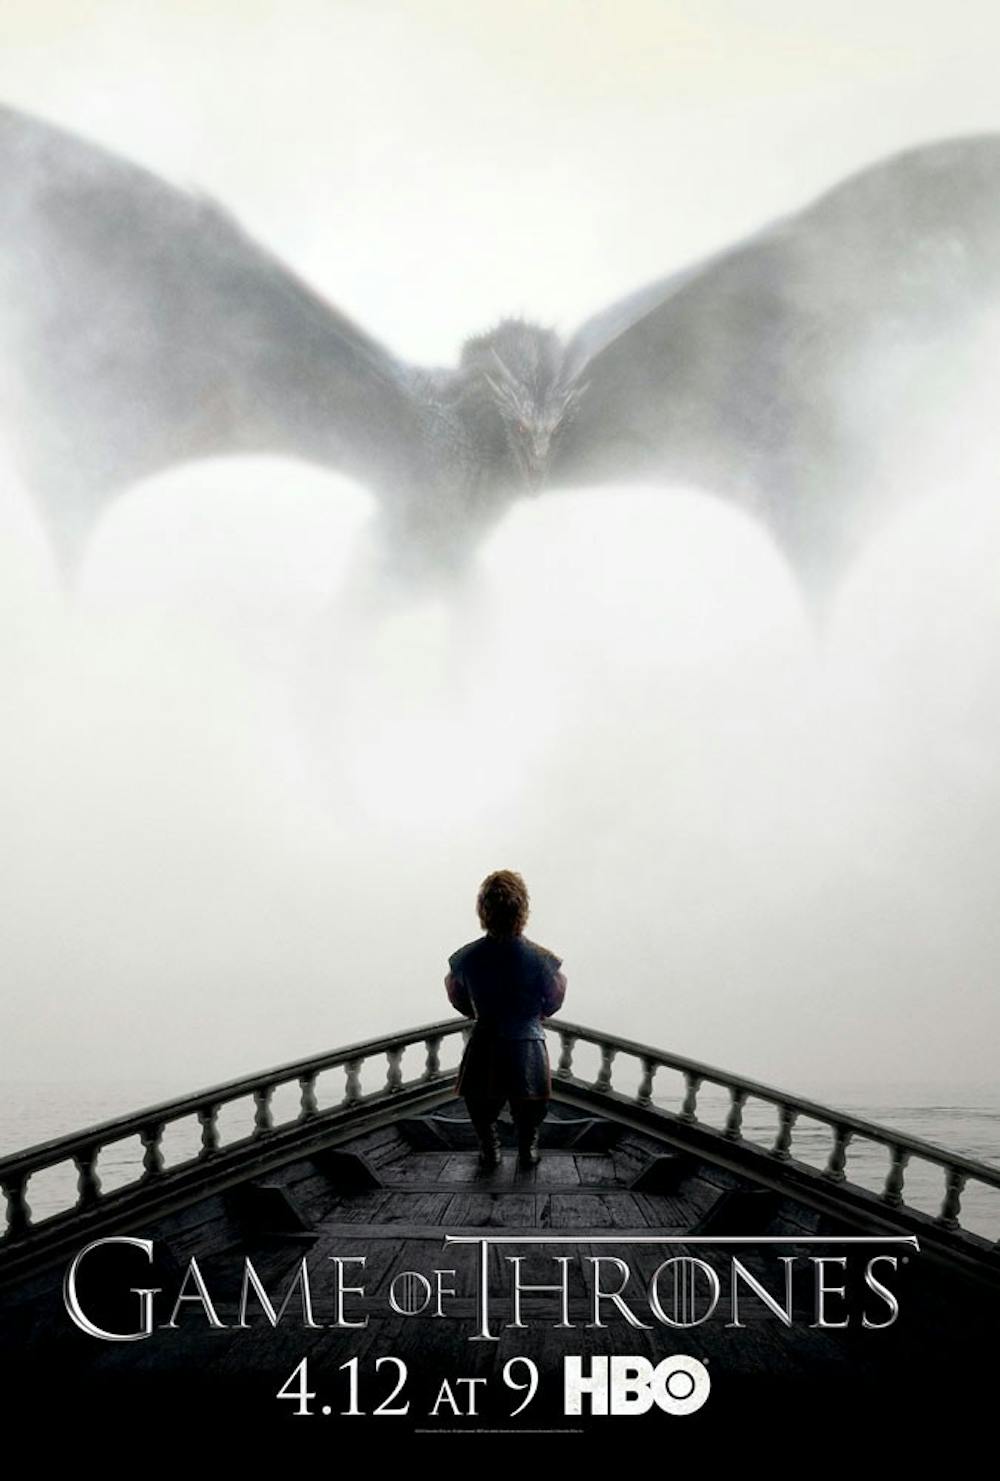 <p>The Student Association will be premiering the first episode of the fifth season of Game of Thrones on March 29 in the Center for the Arts.</p>